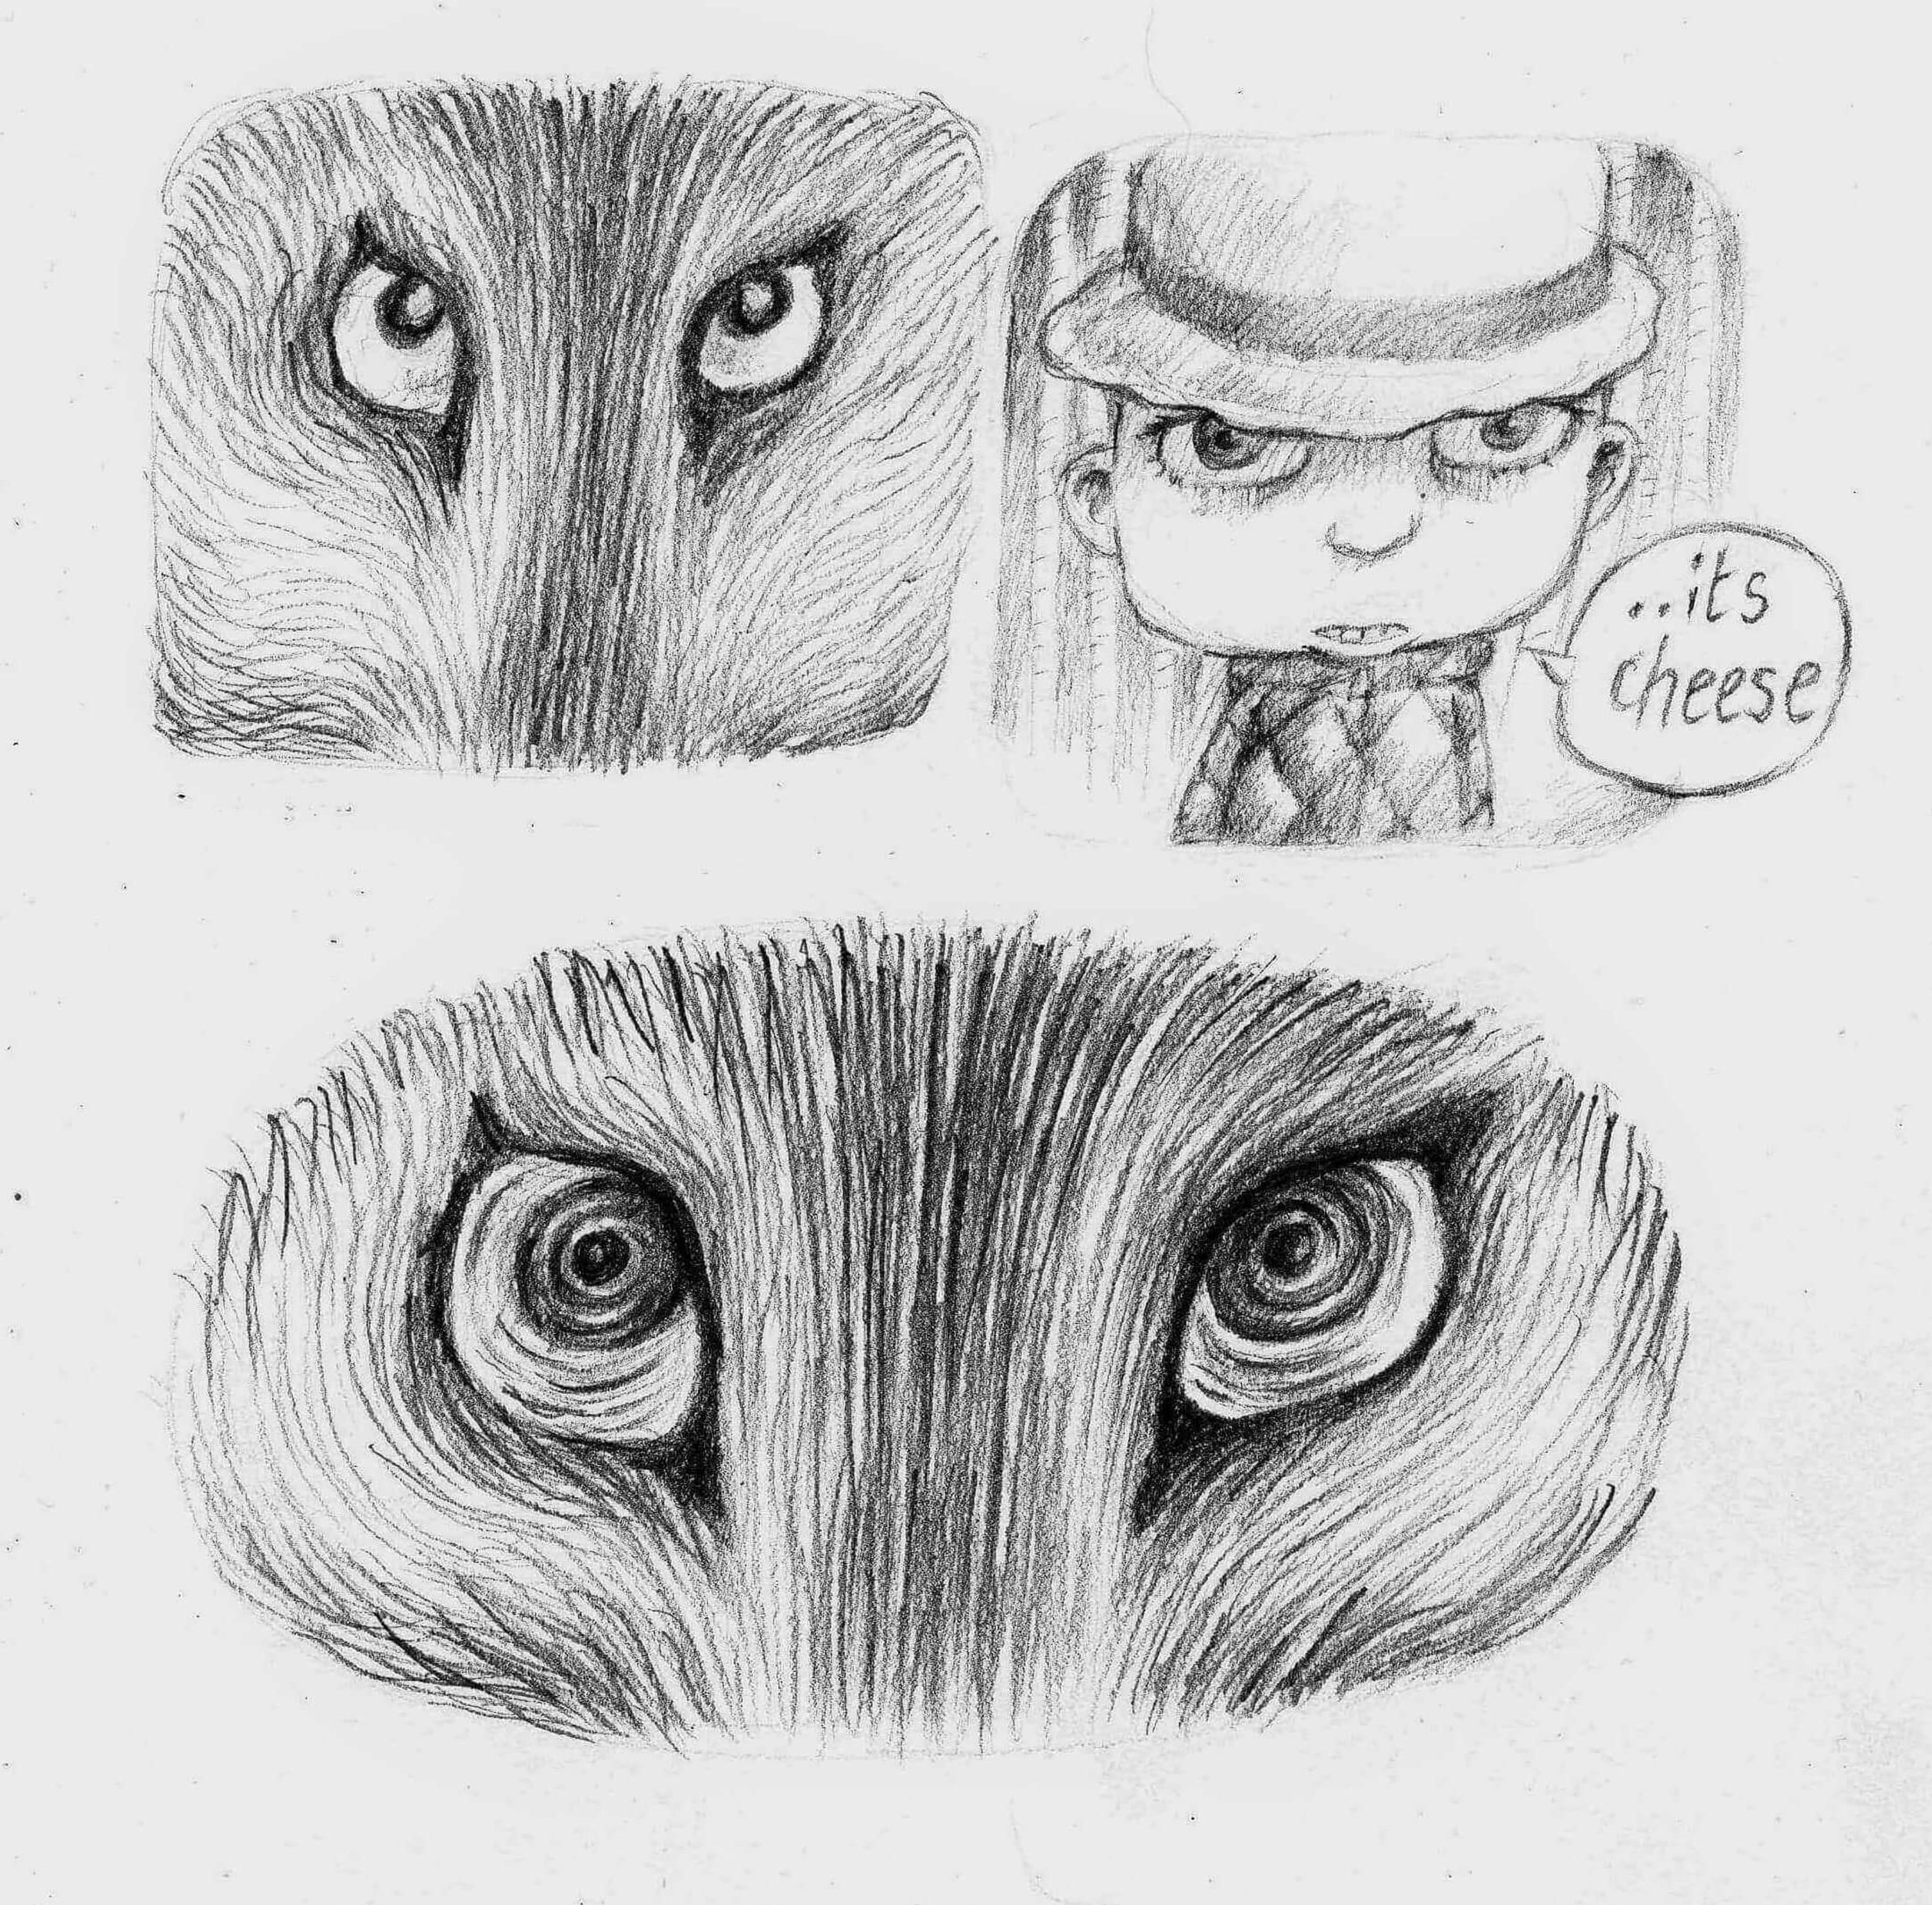 Comic panels rendered in pencil depicting a wolf looking at a small child. A speech bubble attributed to the child reads: "it's cheese".